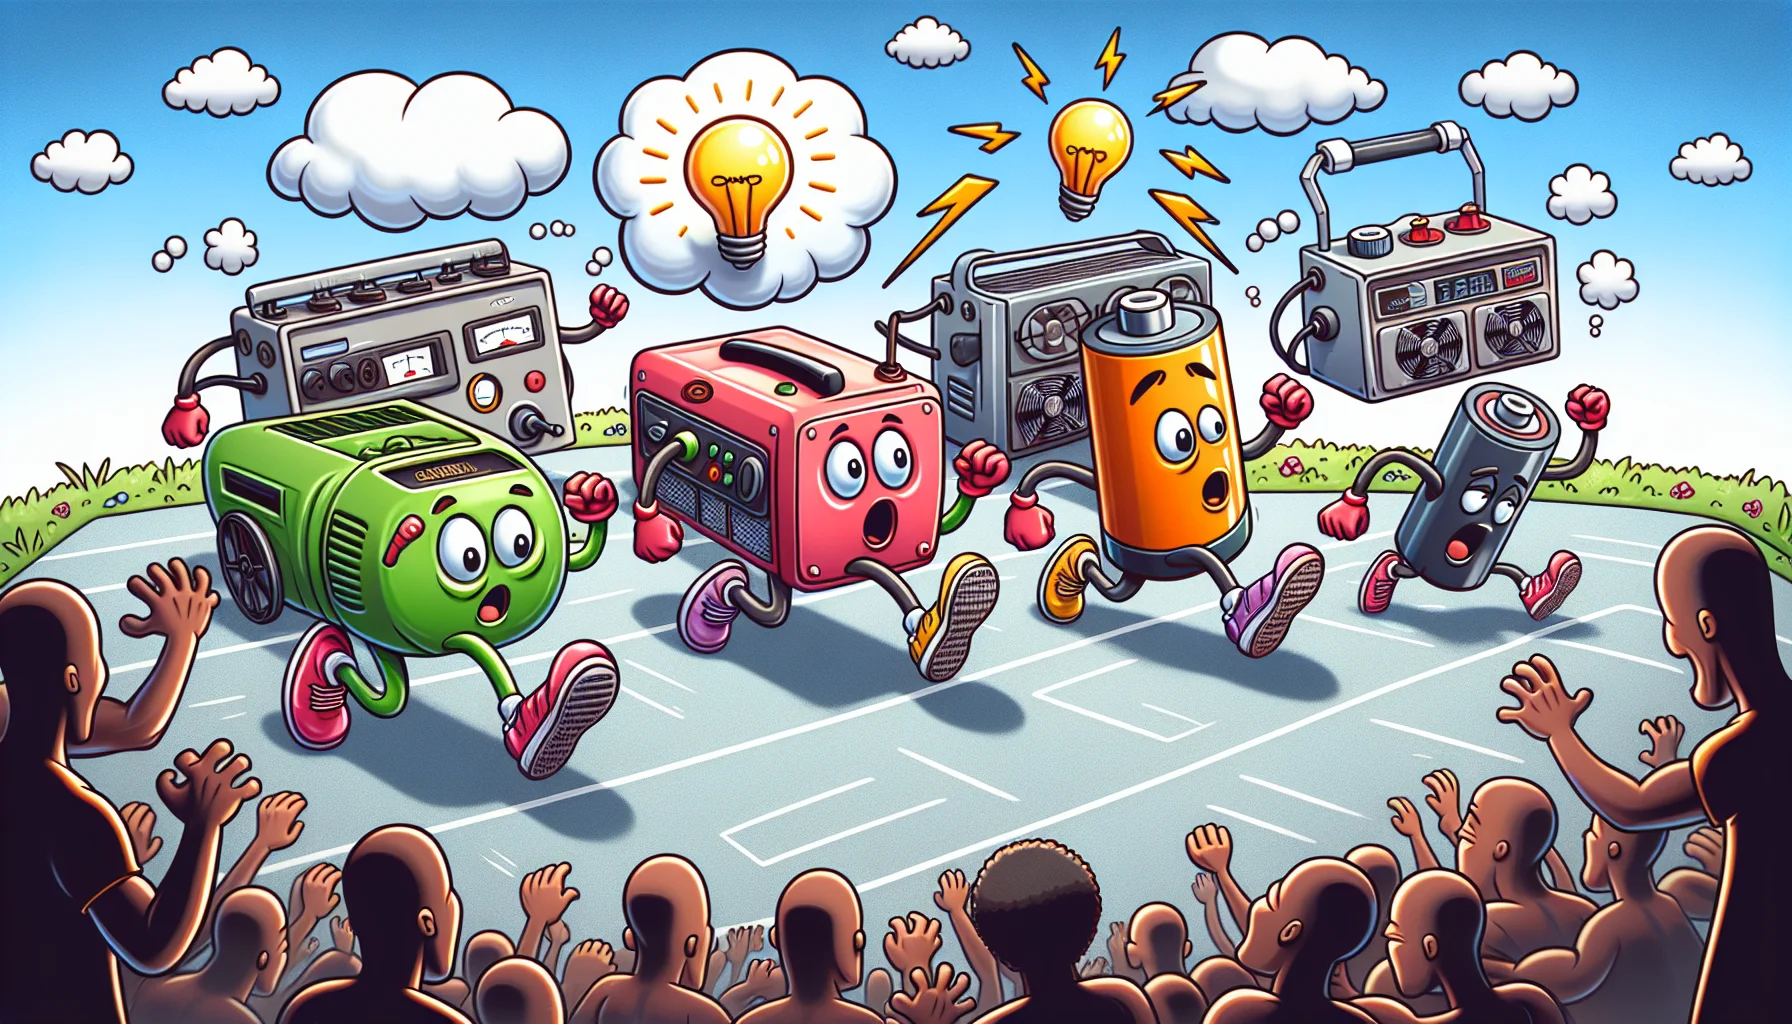 Craft an amusing scene illustrating a variety of emergency generators actively being used. They are all participating in a spirited 'relay race', each generator wearing cartoon-style running shoes. One generator has a thought bubble depicting a light bulb turning on. Another generator appears stunned with humorous shock marks as it notices a battery running past with athletic speed. The scene beckons the viewers, hinting at the fun of generating their own electricity using these devices. Set this image on a sunny day, with a vibrant crowd, consisted of diverse humans cheering and laughing at the humorsight, adding a lively atmosphere.